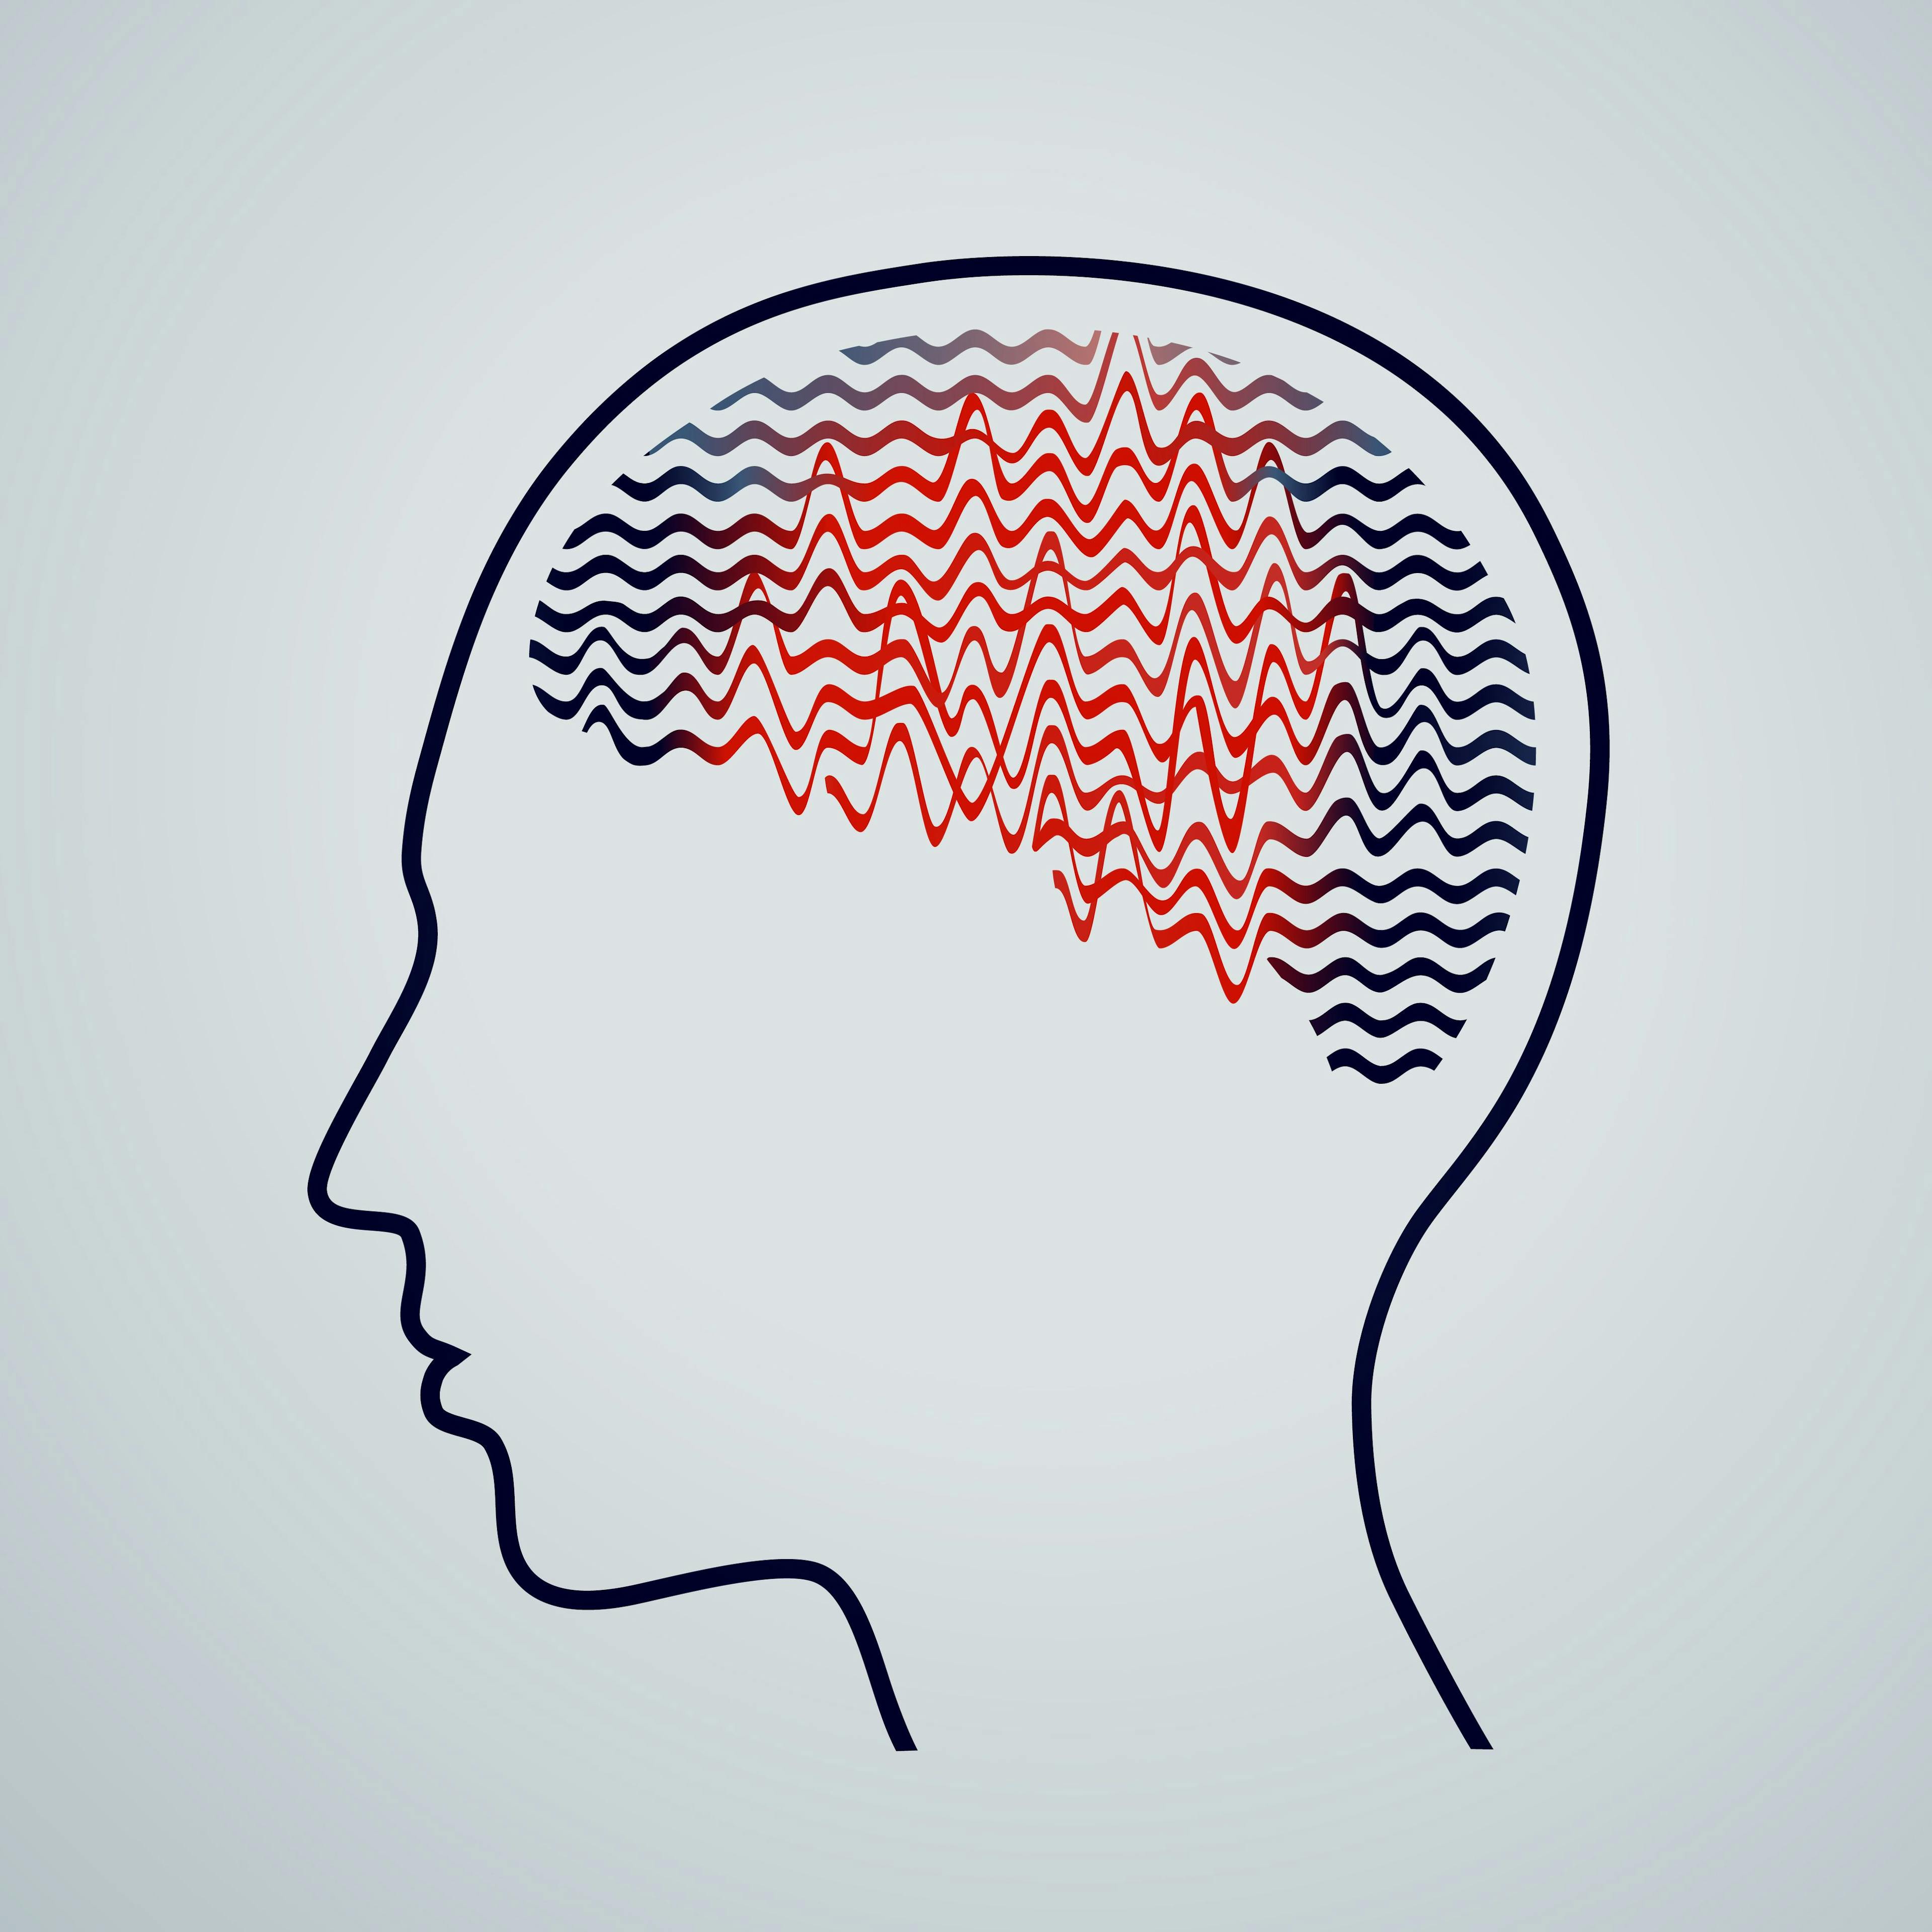 Identifying the Difference Between Functional Seizures and Epileptic Seizures